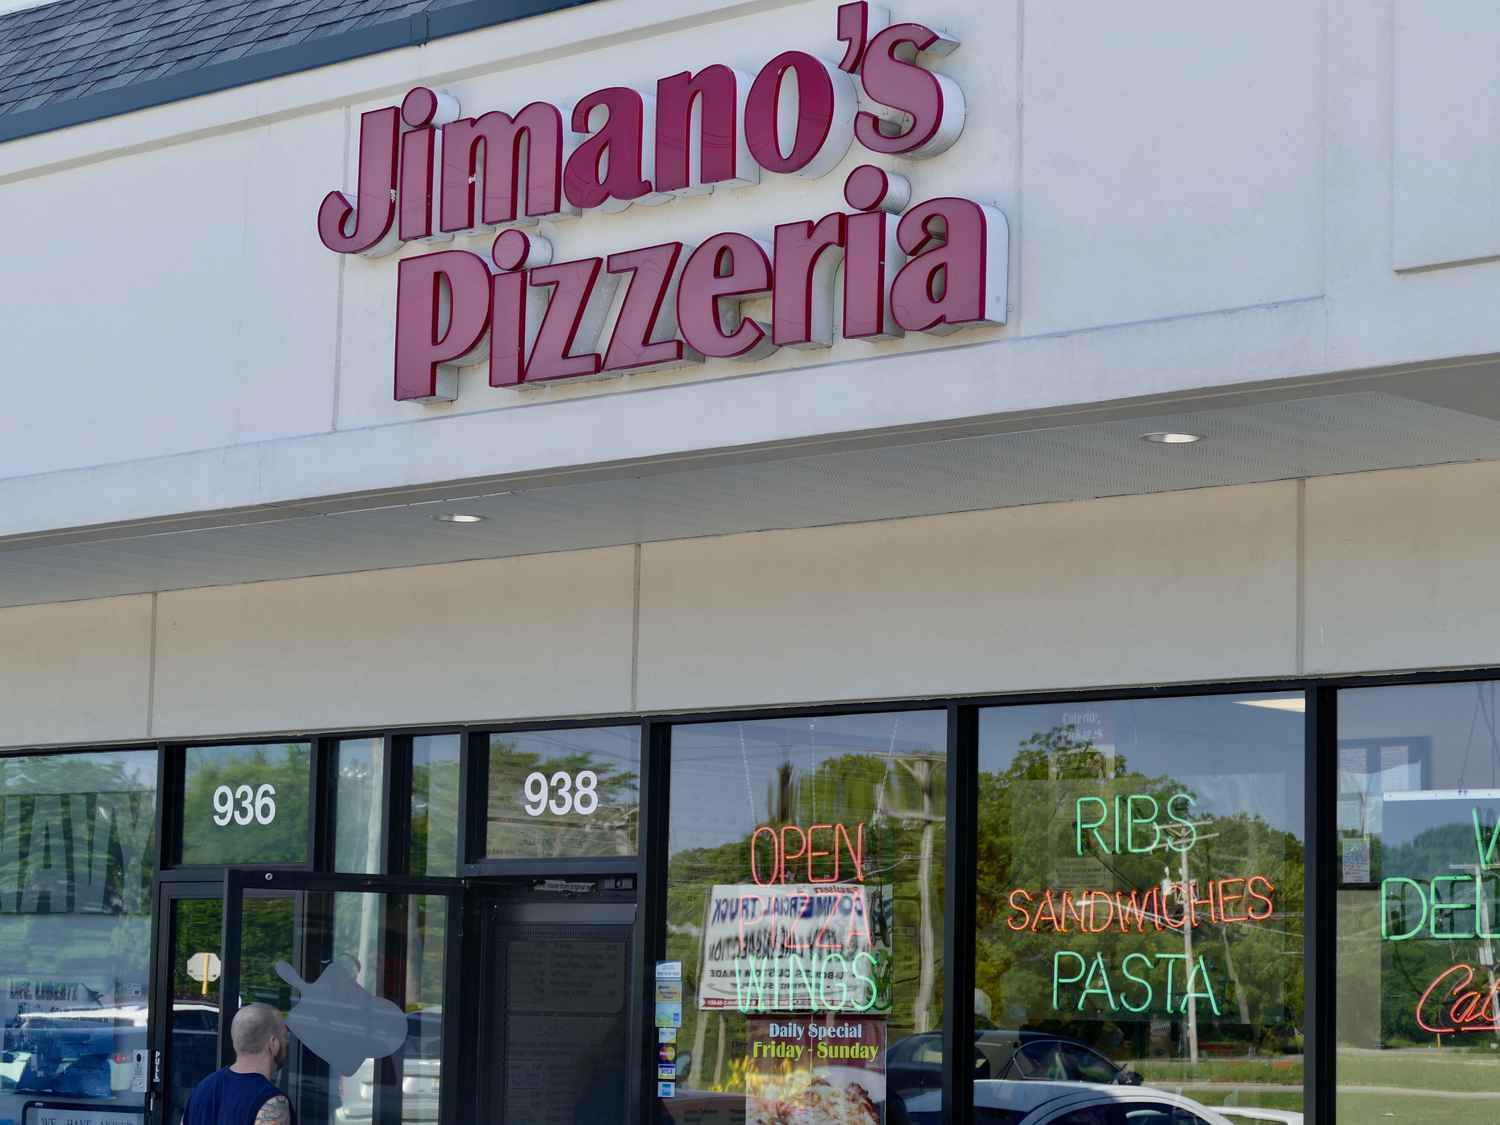 The first Jimano's Pizzeria location opened in Waukegan, IL.